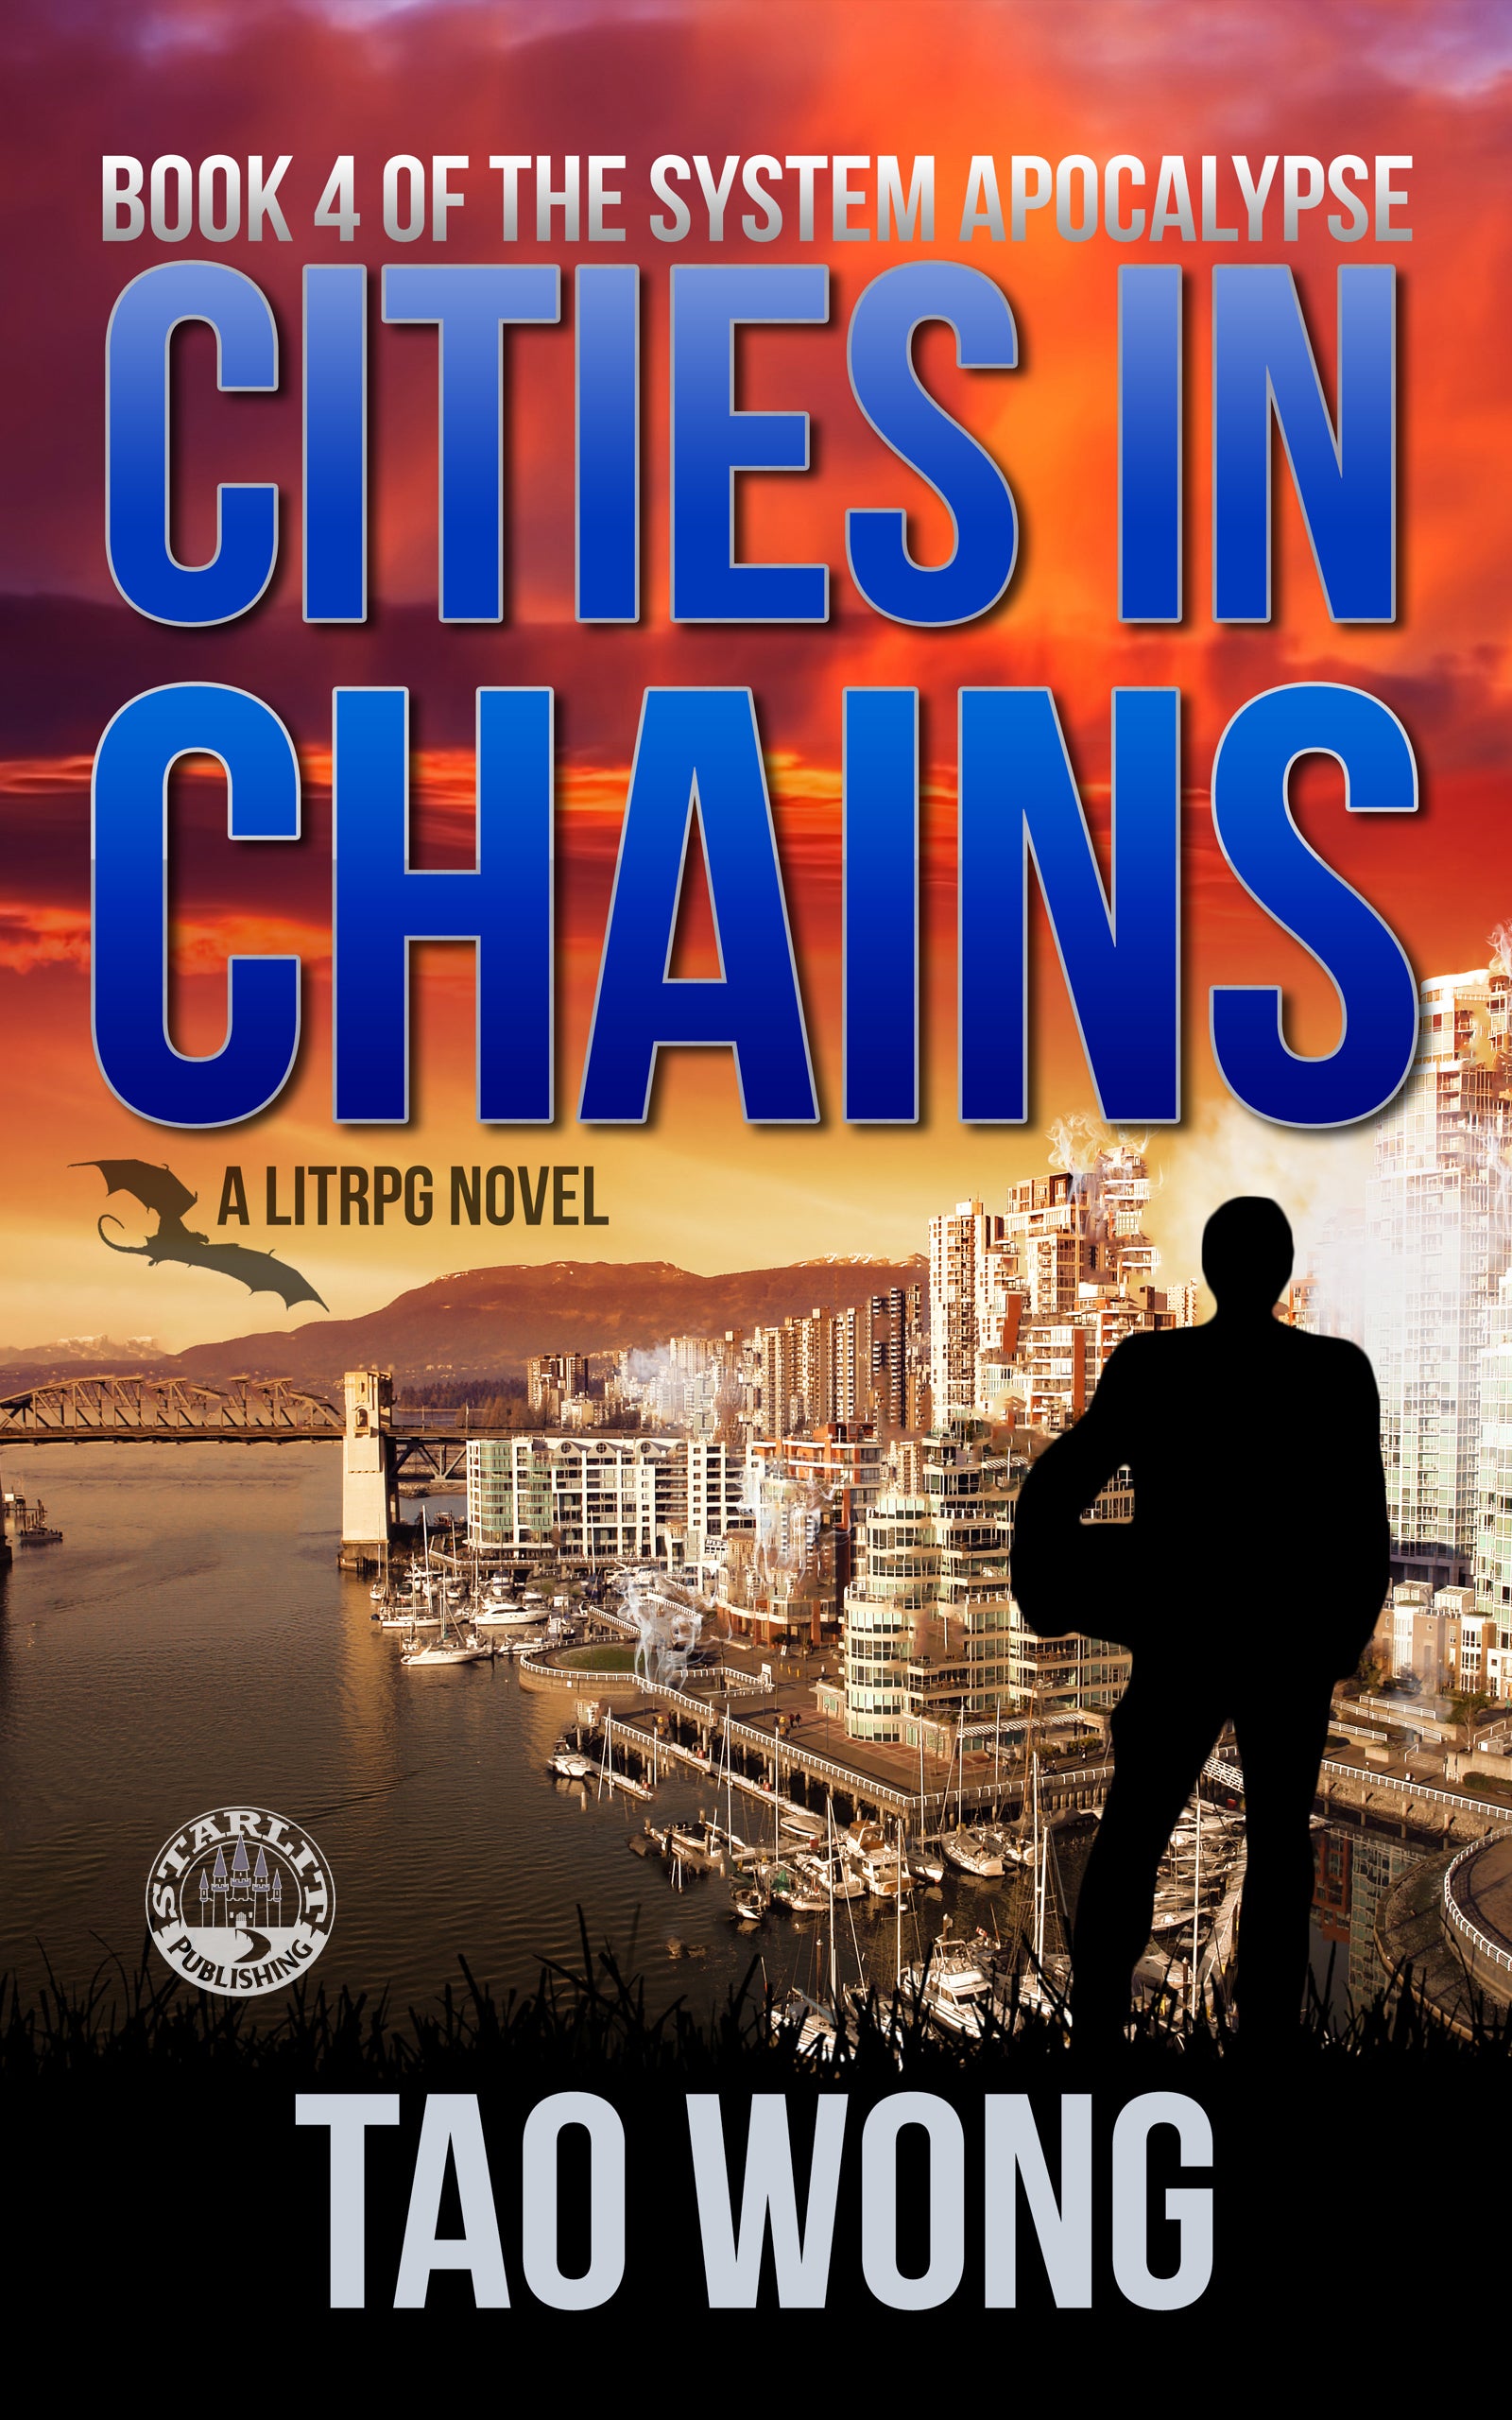 The System Apocalypse: Cities in Chains (book 4)